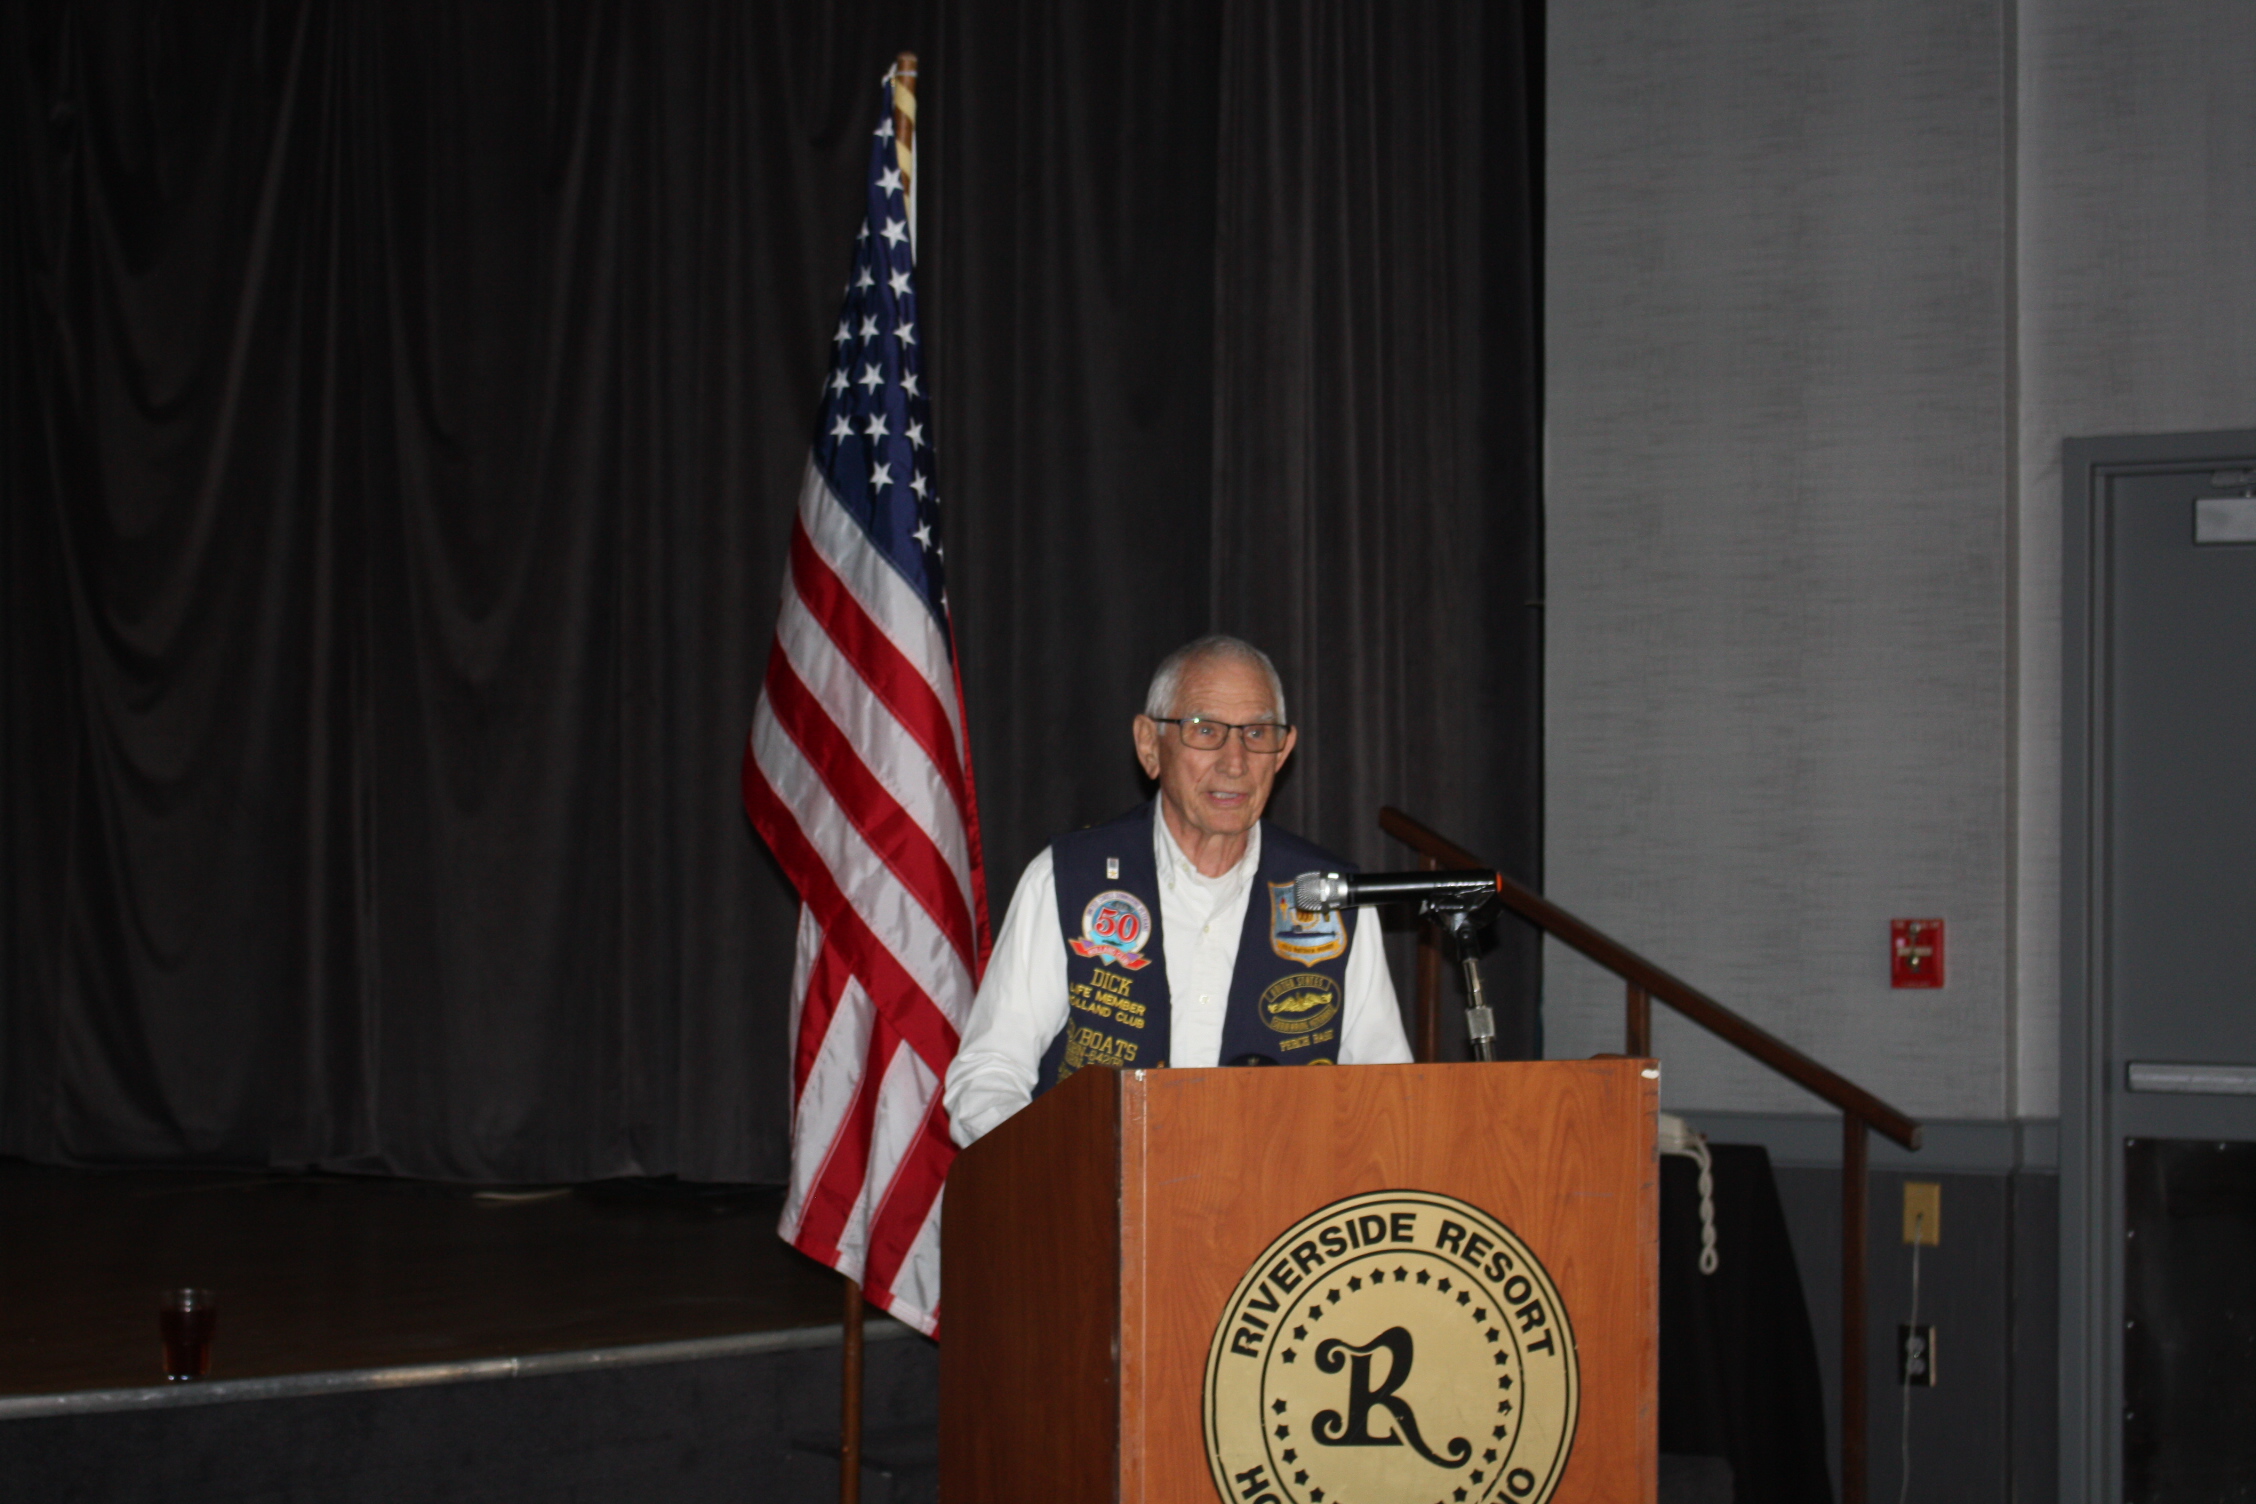 Capt. Dick Noreika was a speaker at the Western Region Roundup, Laughlin, NV, in 2019, 03/2019.